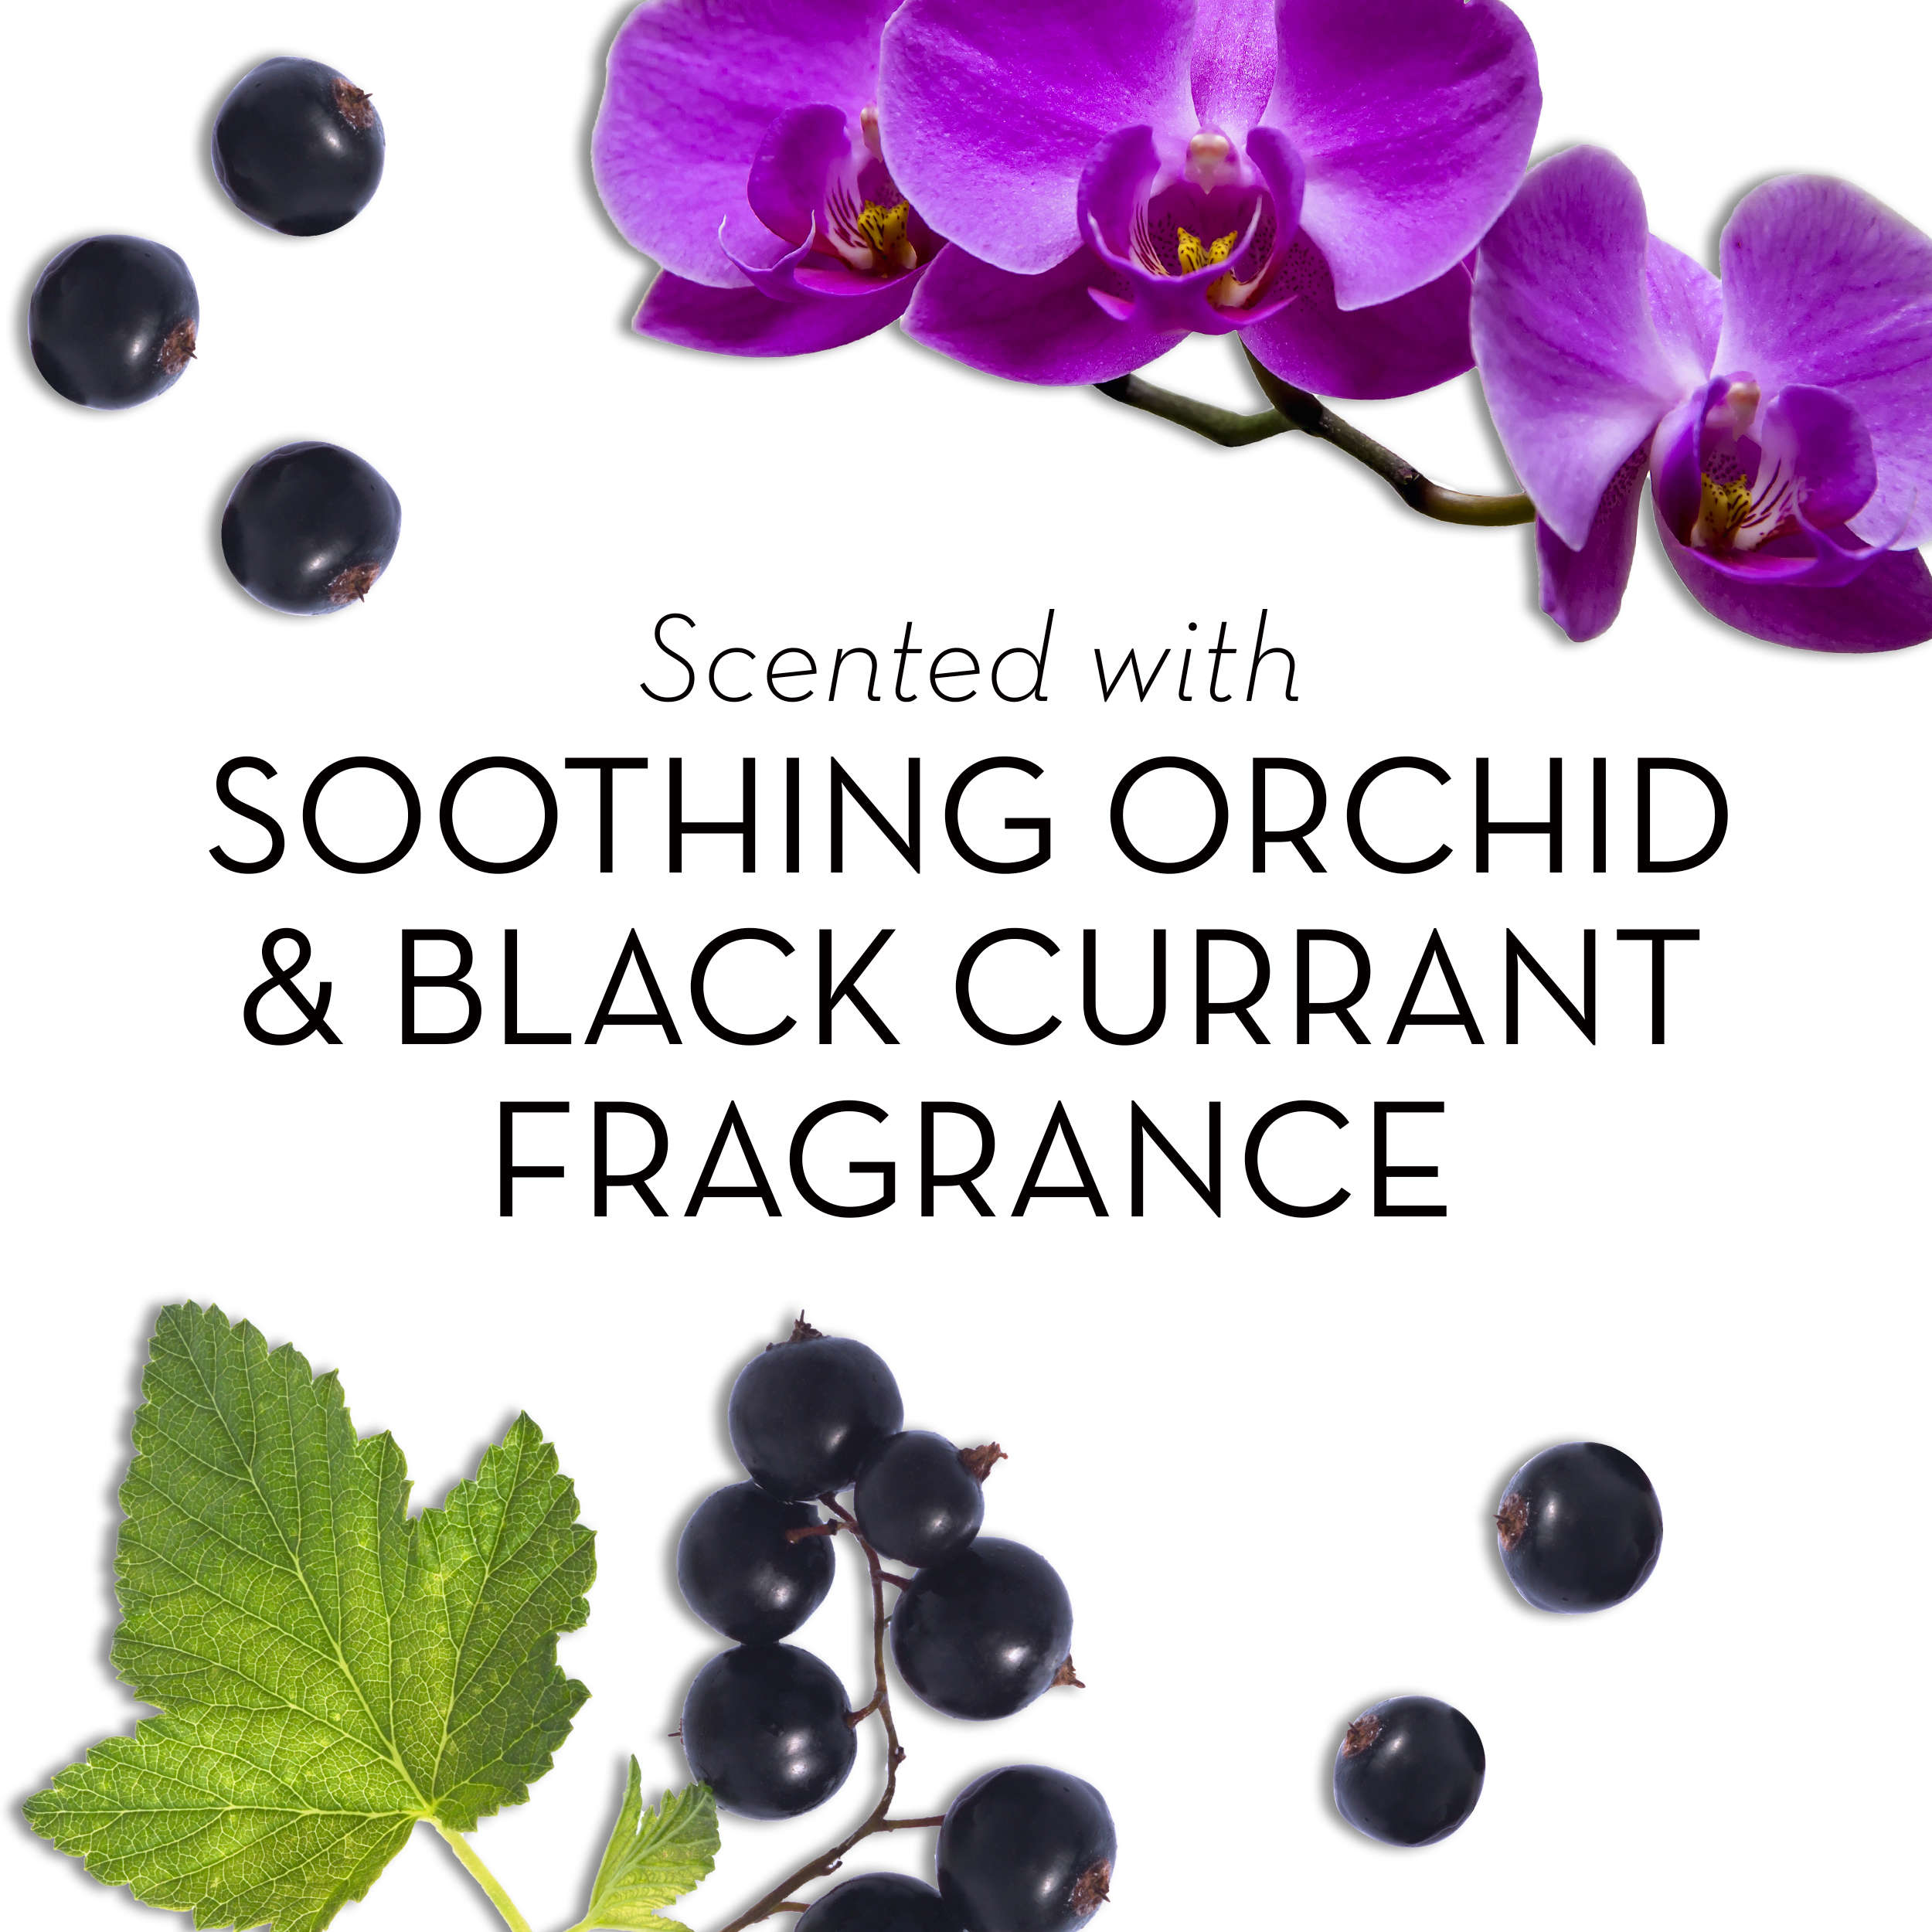 Olay Fresh Outlast Soothing Orchid & Black Currant Beauty Bar 4 oz, 6 count - image 3 of 8